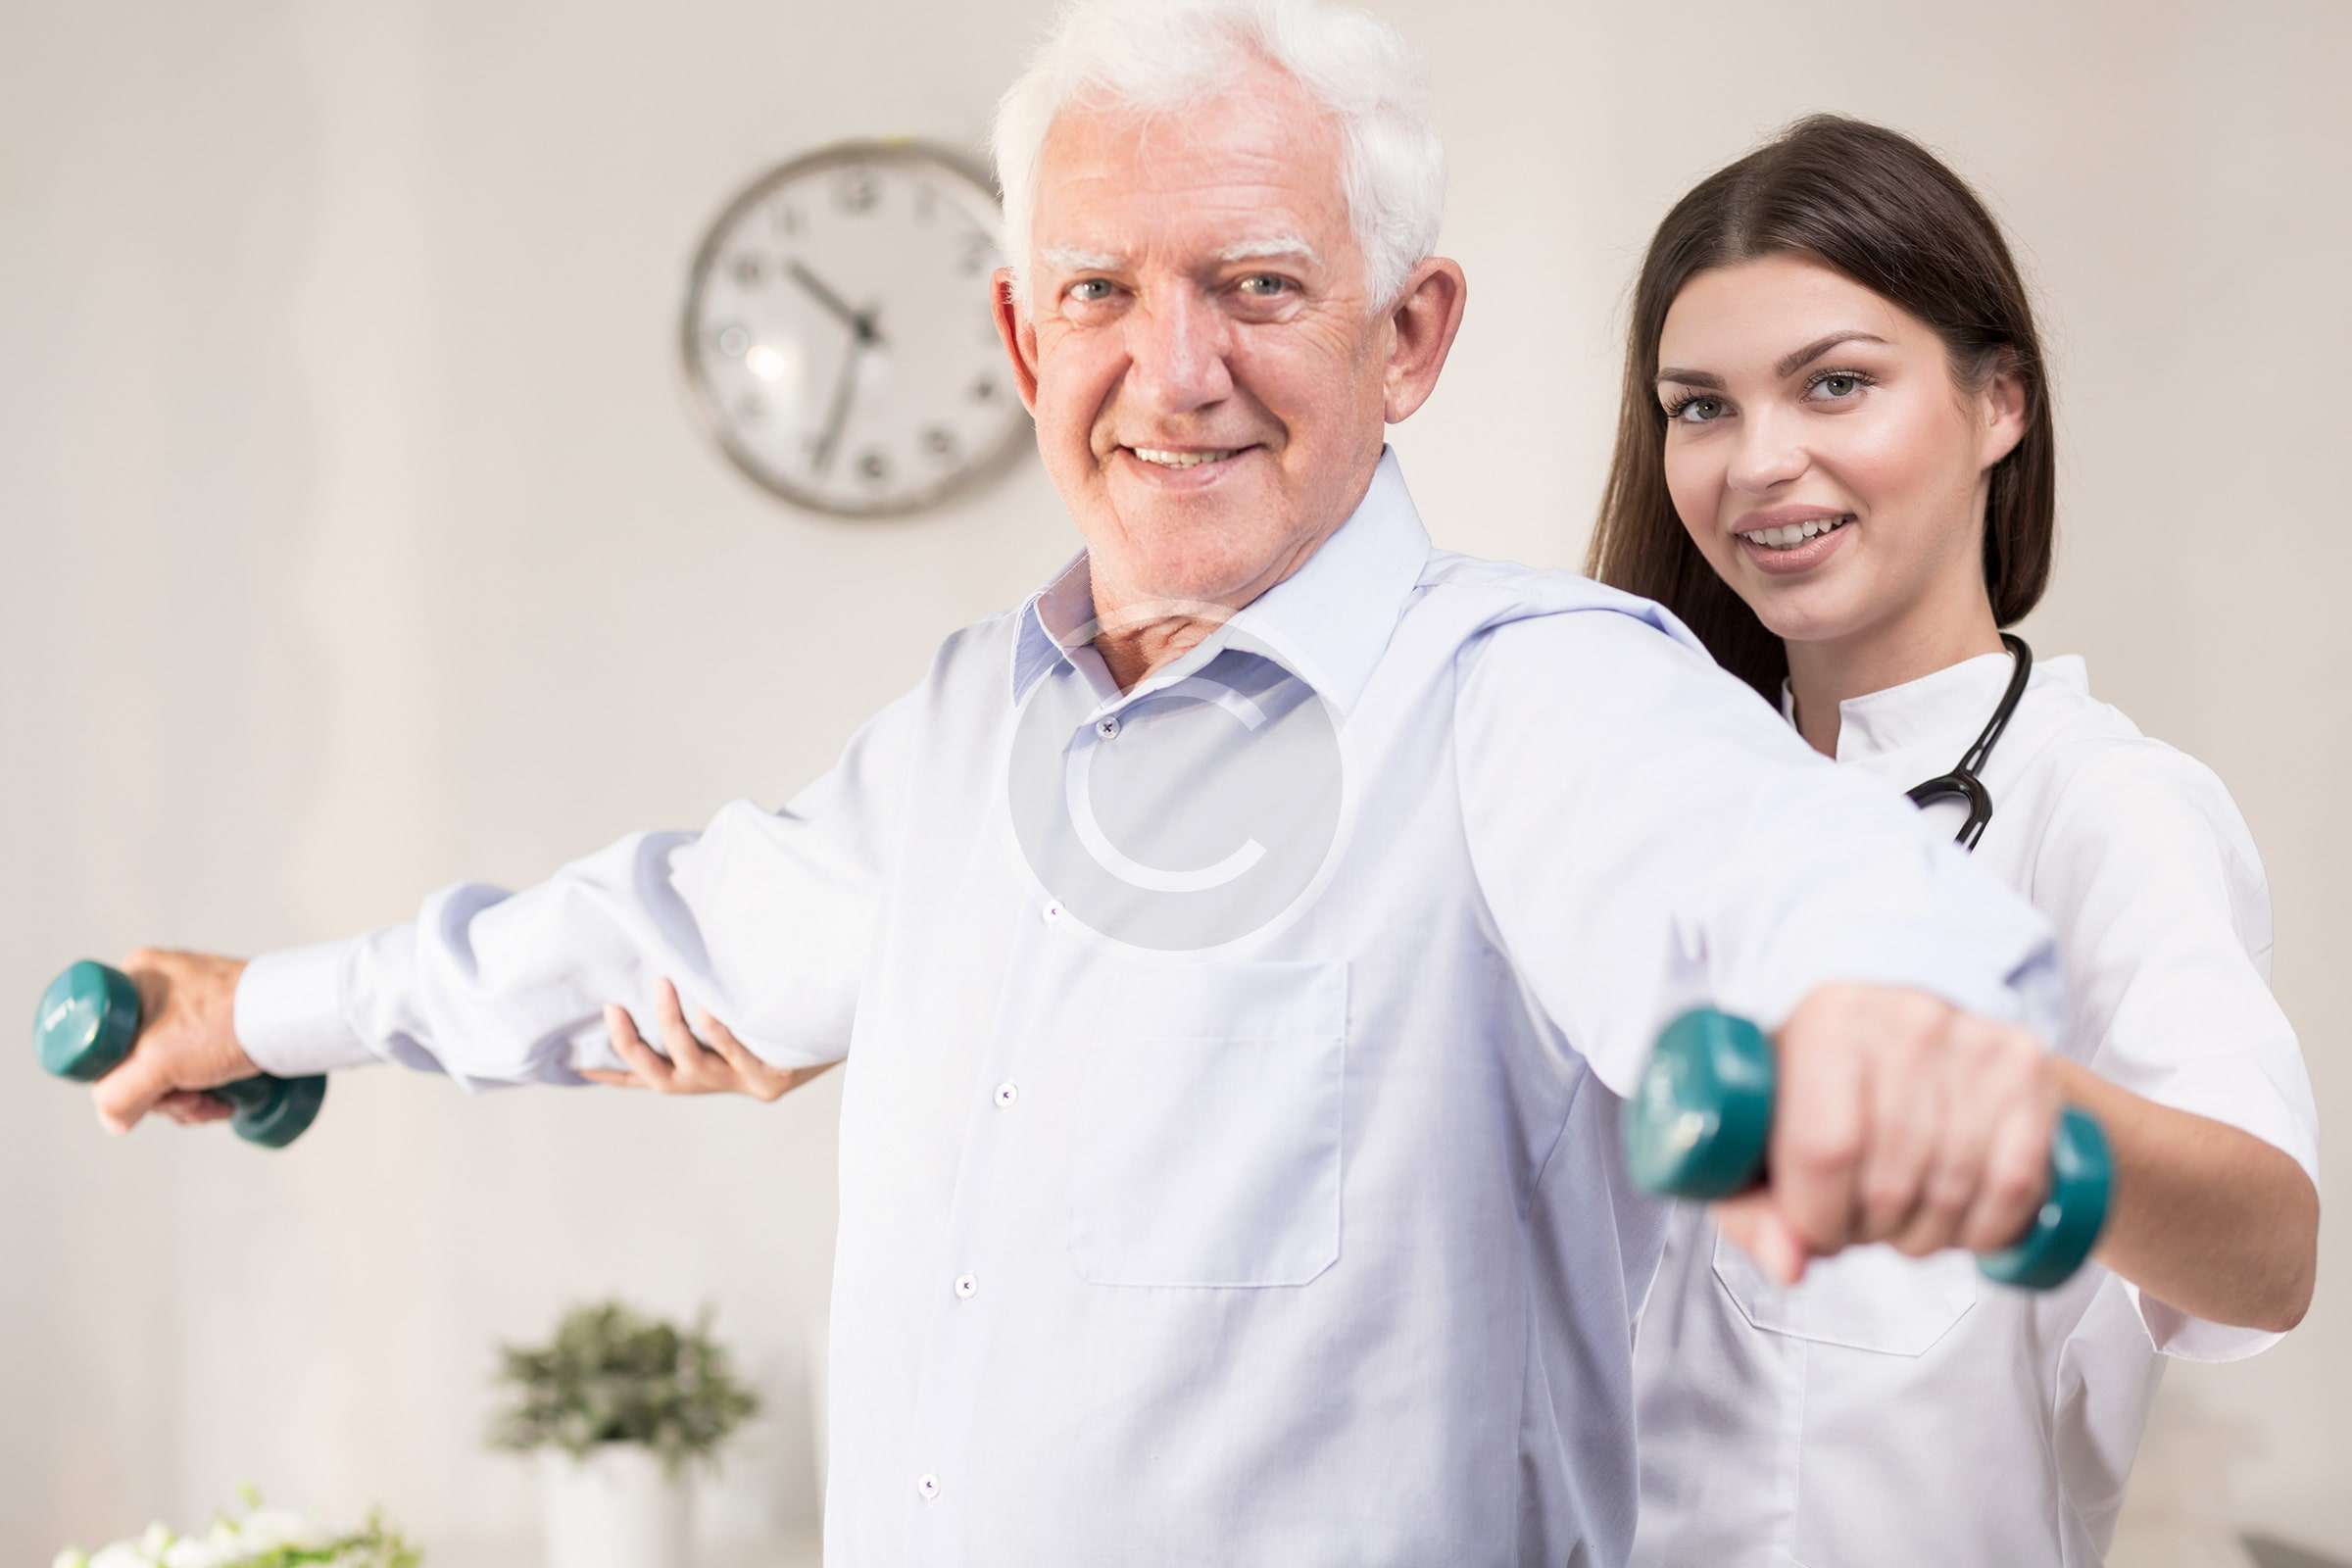 Tips for Keeping the Senior in Your Life Active